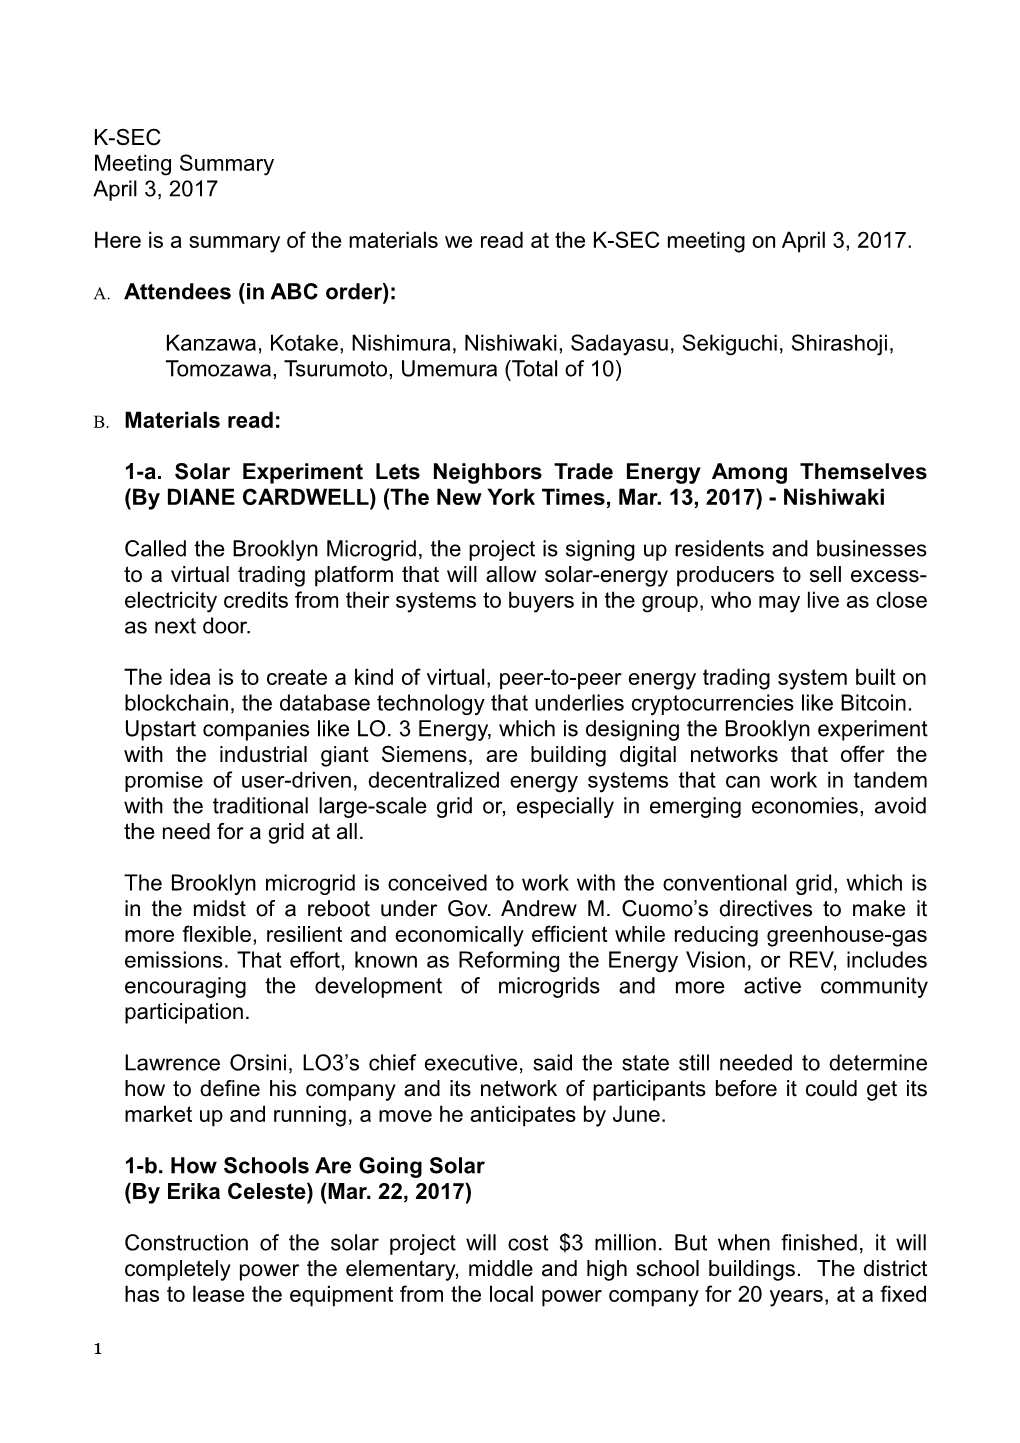 Here Is a Summary of the Materials We Read at the K-SEC Meeting on April 3, 2017